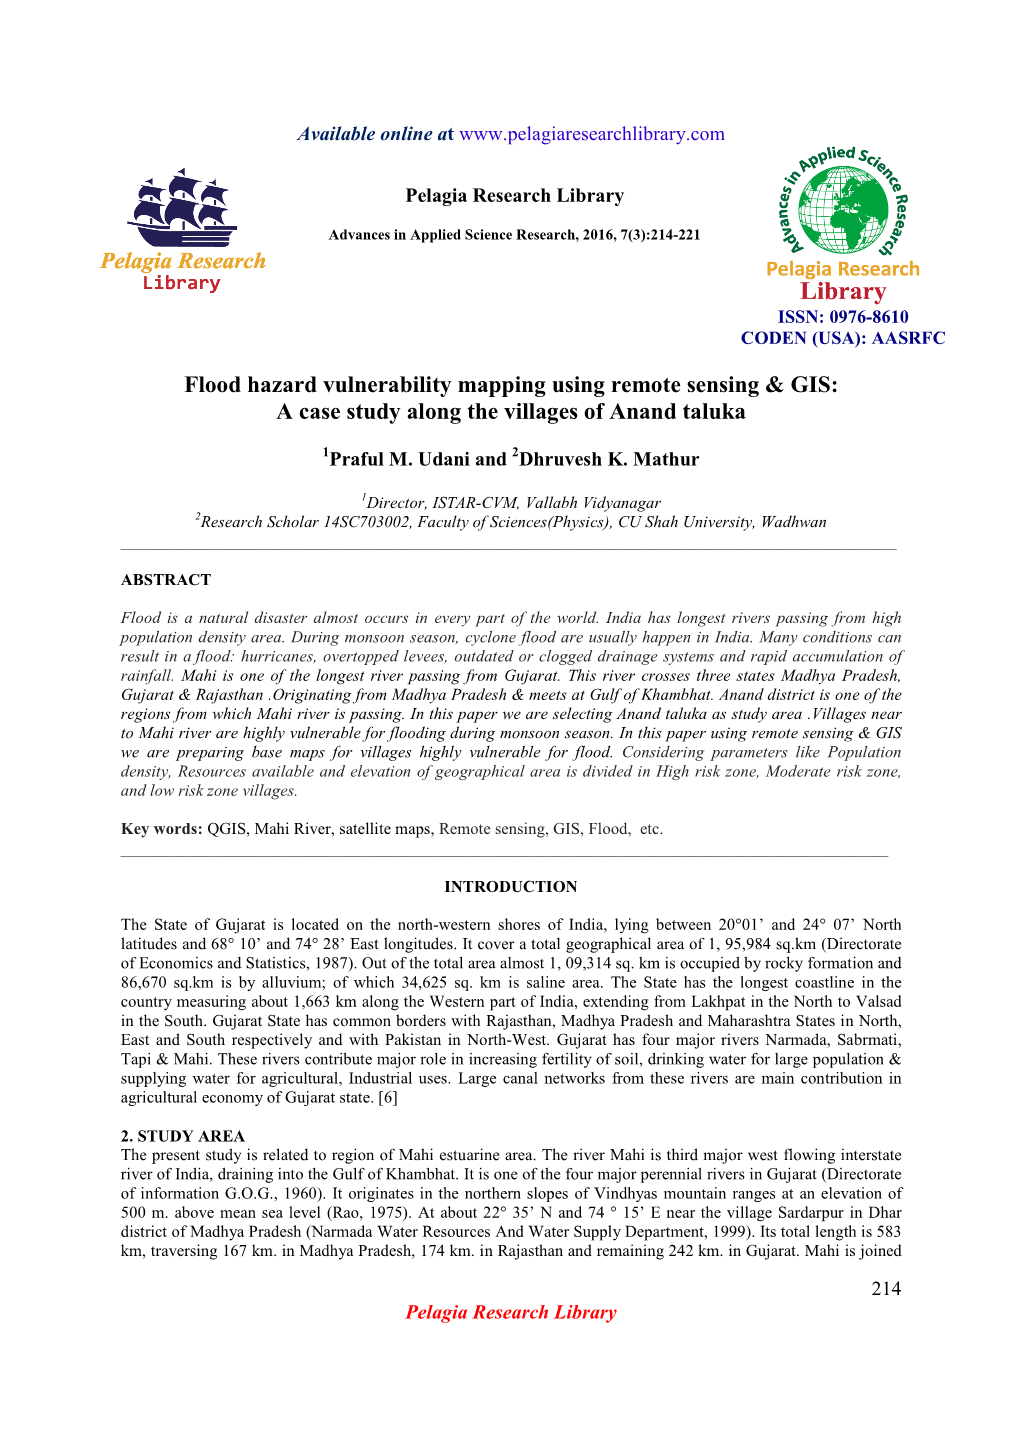 Flood Hazard Vulnerability Mapping Using Remote Sensing & GIS: a Case Study Along the Villages of Anand Taluka